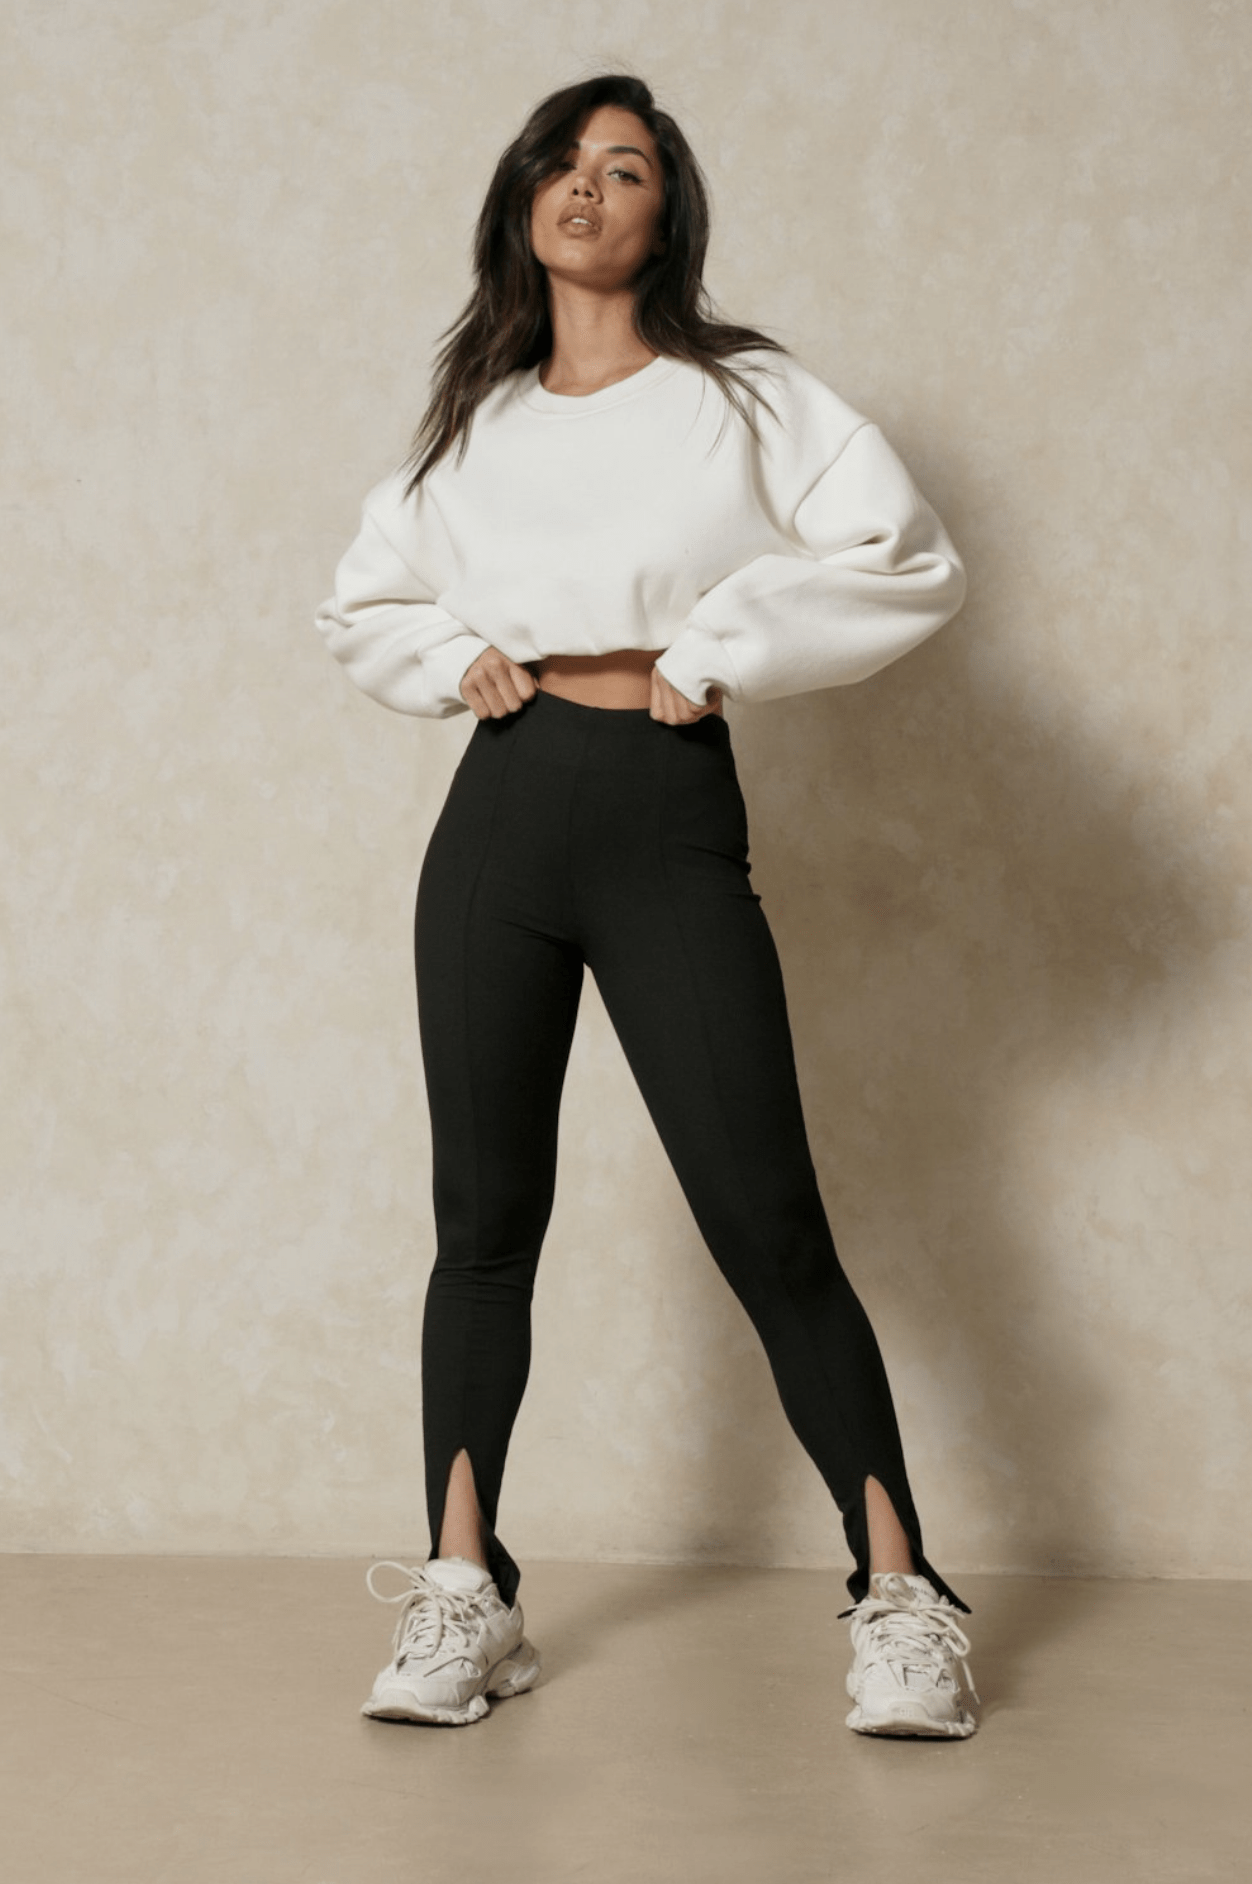 Long Sleeve White and Green Raglan Crop Top / Made in USA – Lyla's Crop Tops